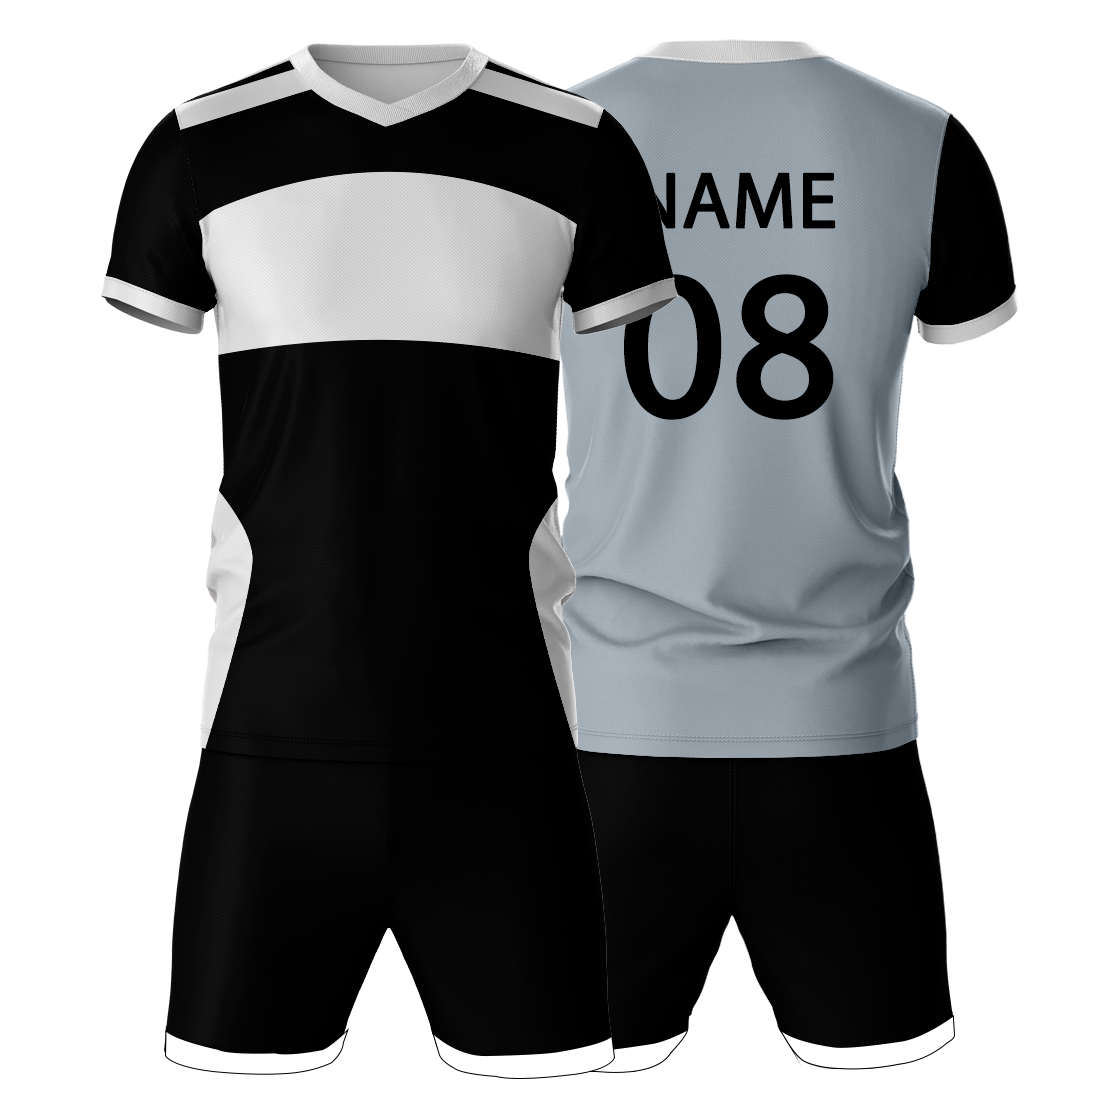 All Over Printed Jersey With Shorts Name & Number Printed.NP50000656